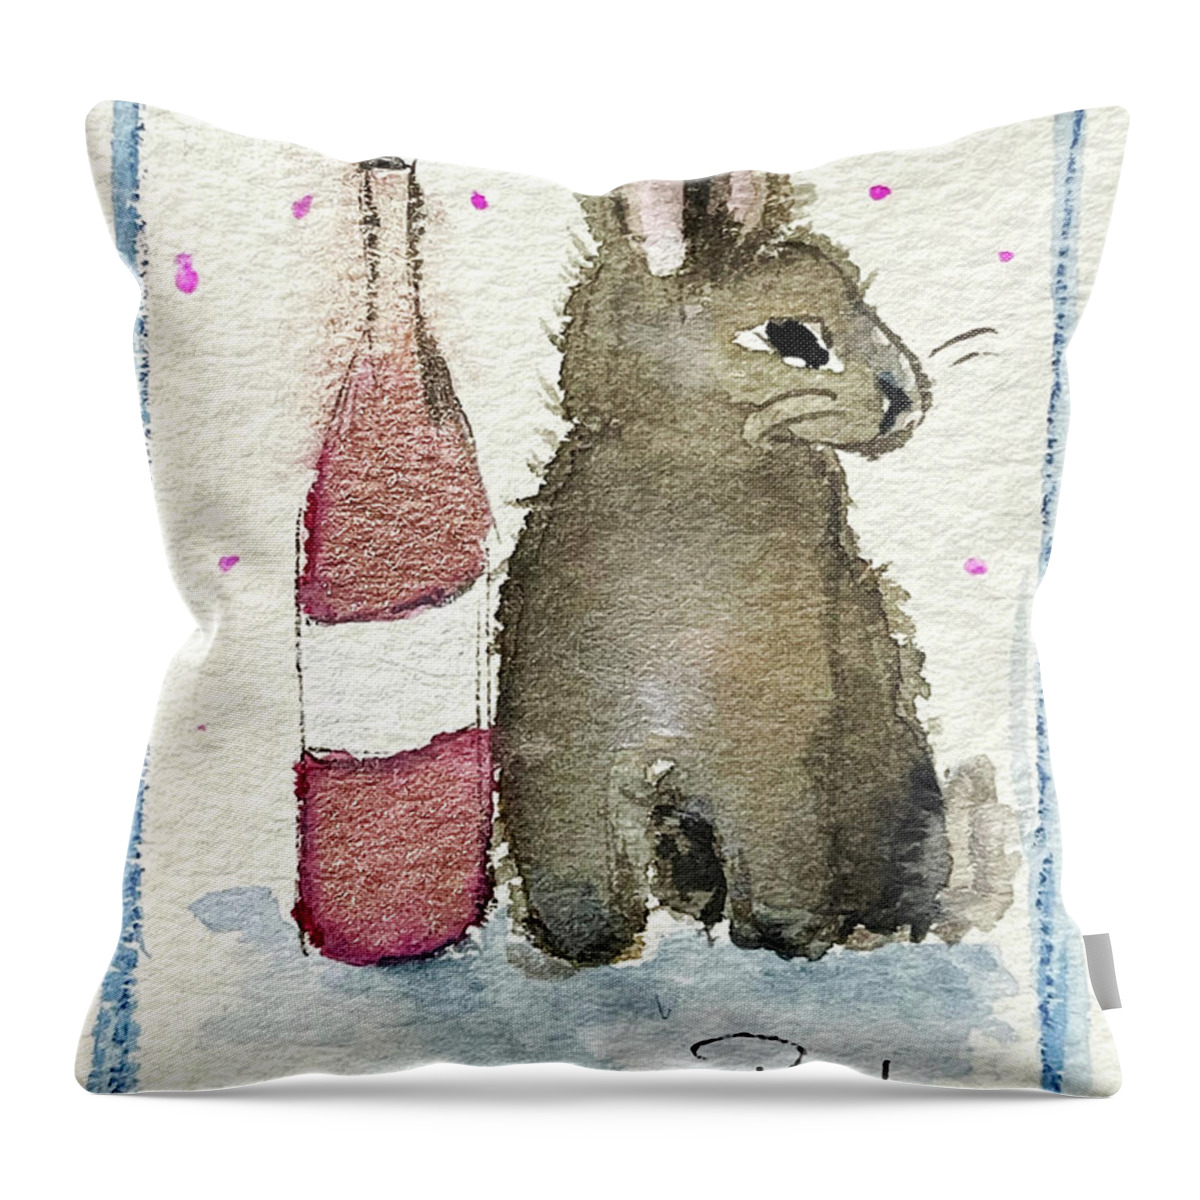 Bunny Throw Pillow featuring the painting Drunk Bunny 1 by Roxy Rich